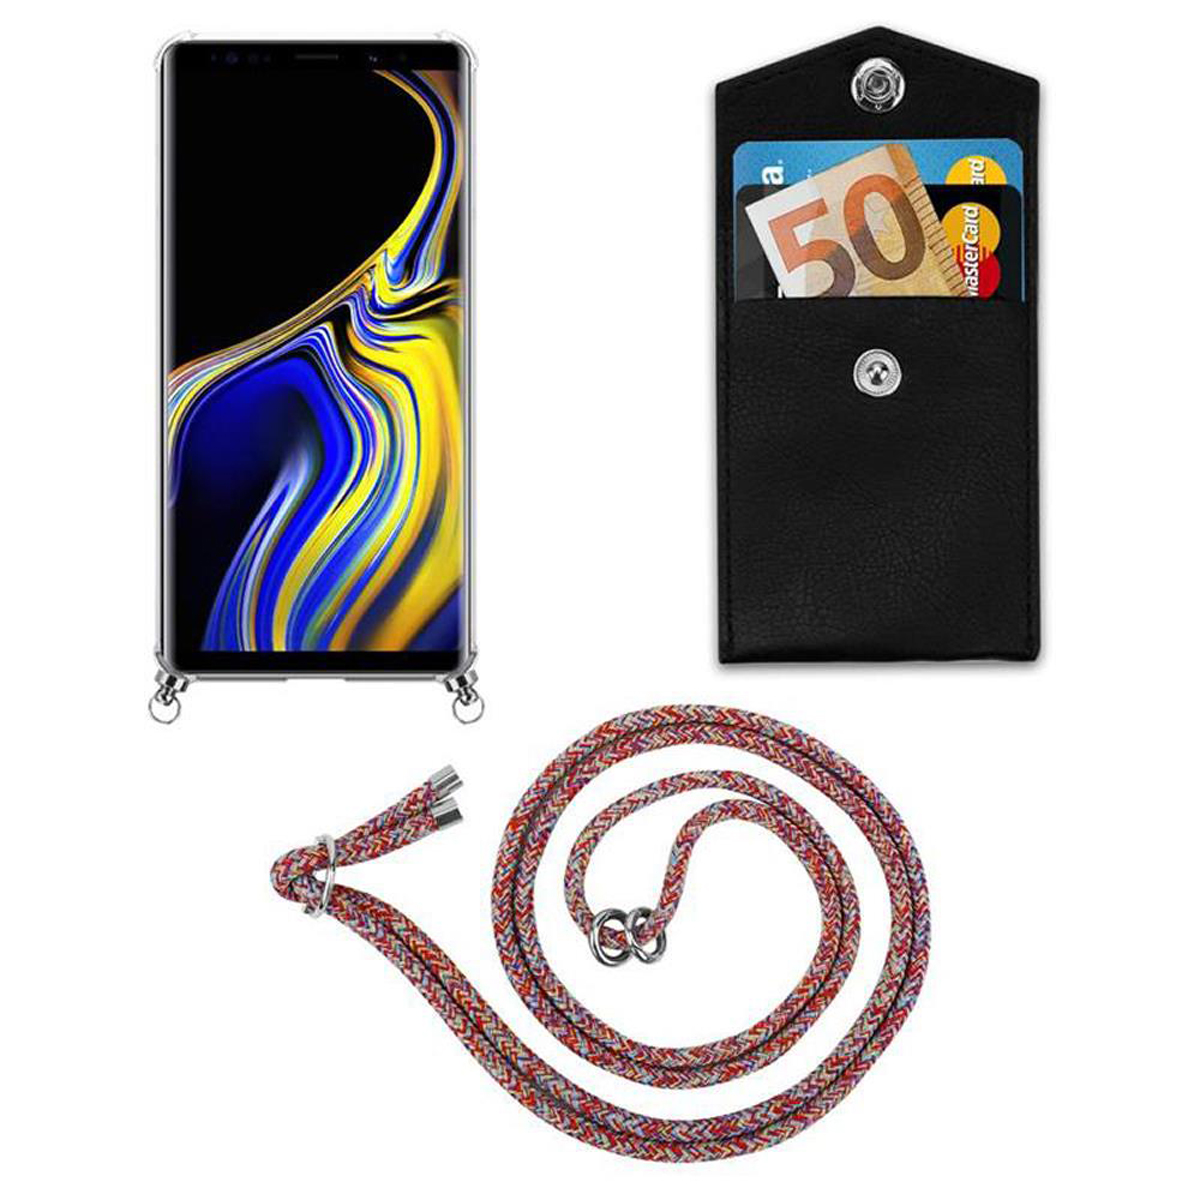 CADORABO Handy Kette mit 9, abnehmbarer und Band Hülle, Ringen, NOTE Silber Backcover, COLORFUL Galaxy Samsung, Kordel PARROT